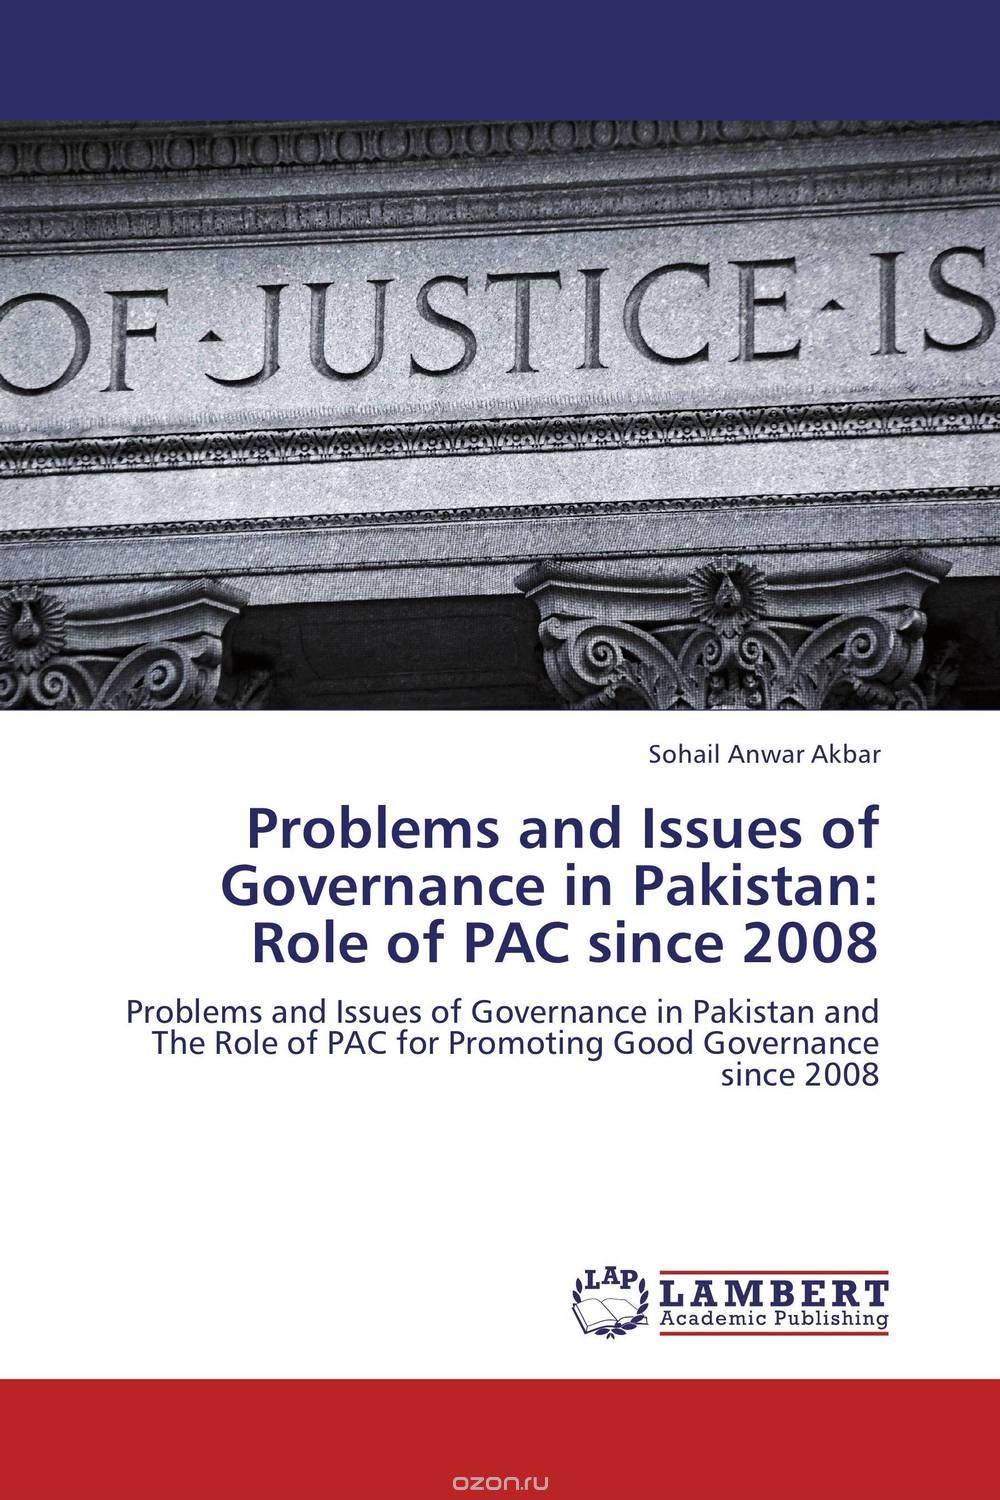 Скачать книгу "Problems and Issues of Governance in Pakistan: Role of PAC since 2008"